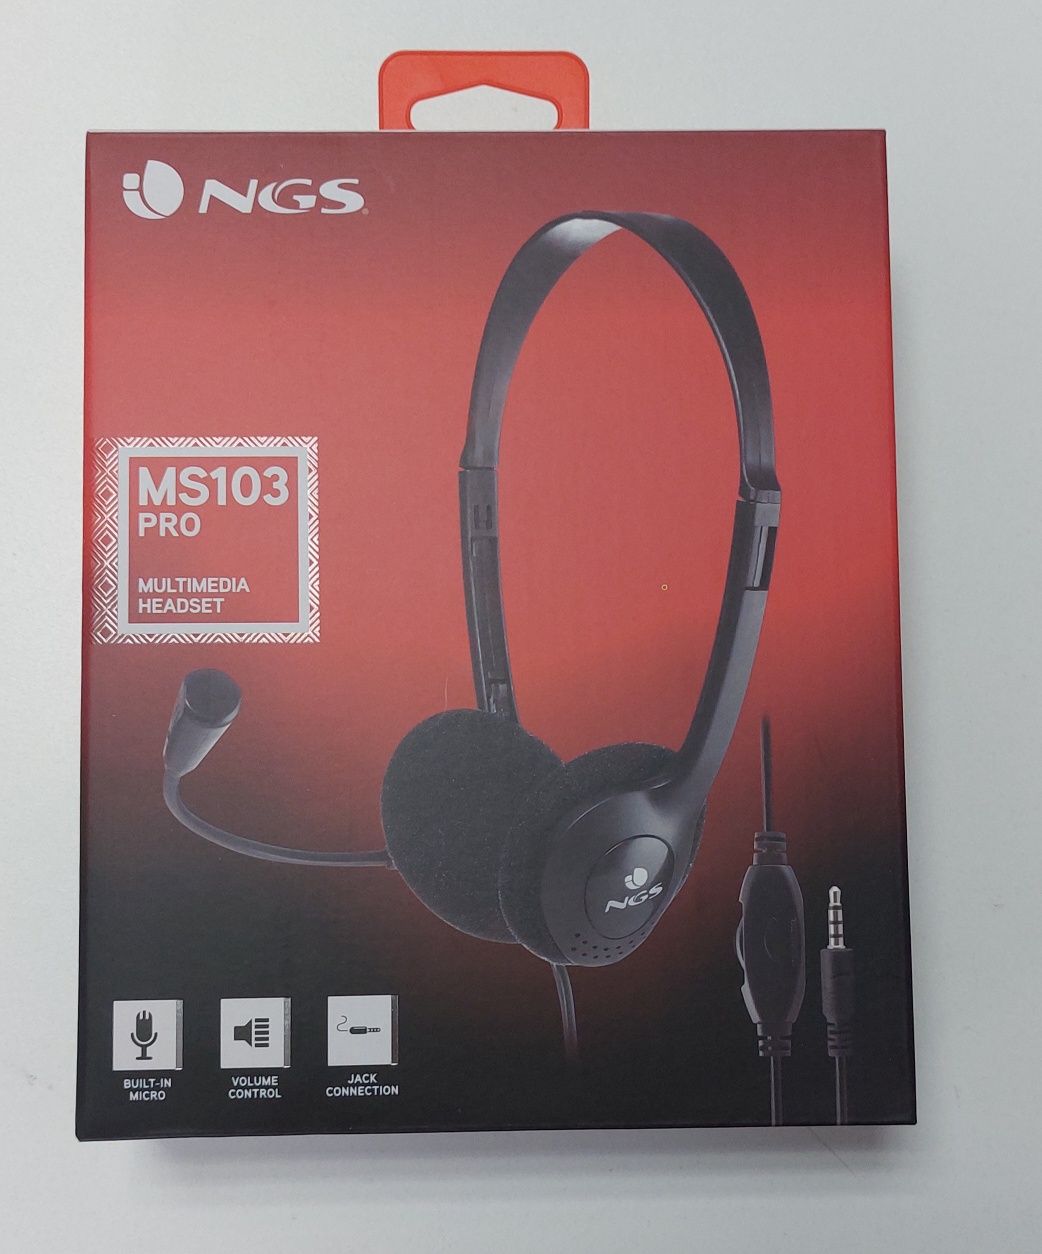 NGS Headset MS103 Pro